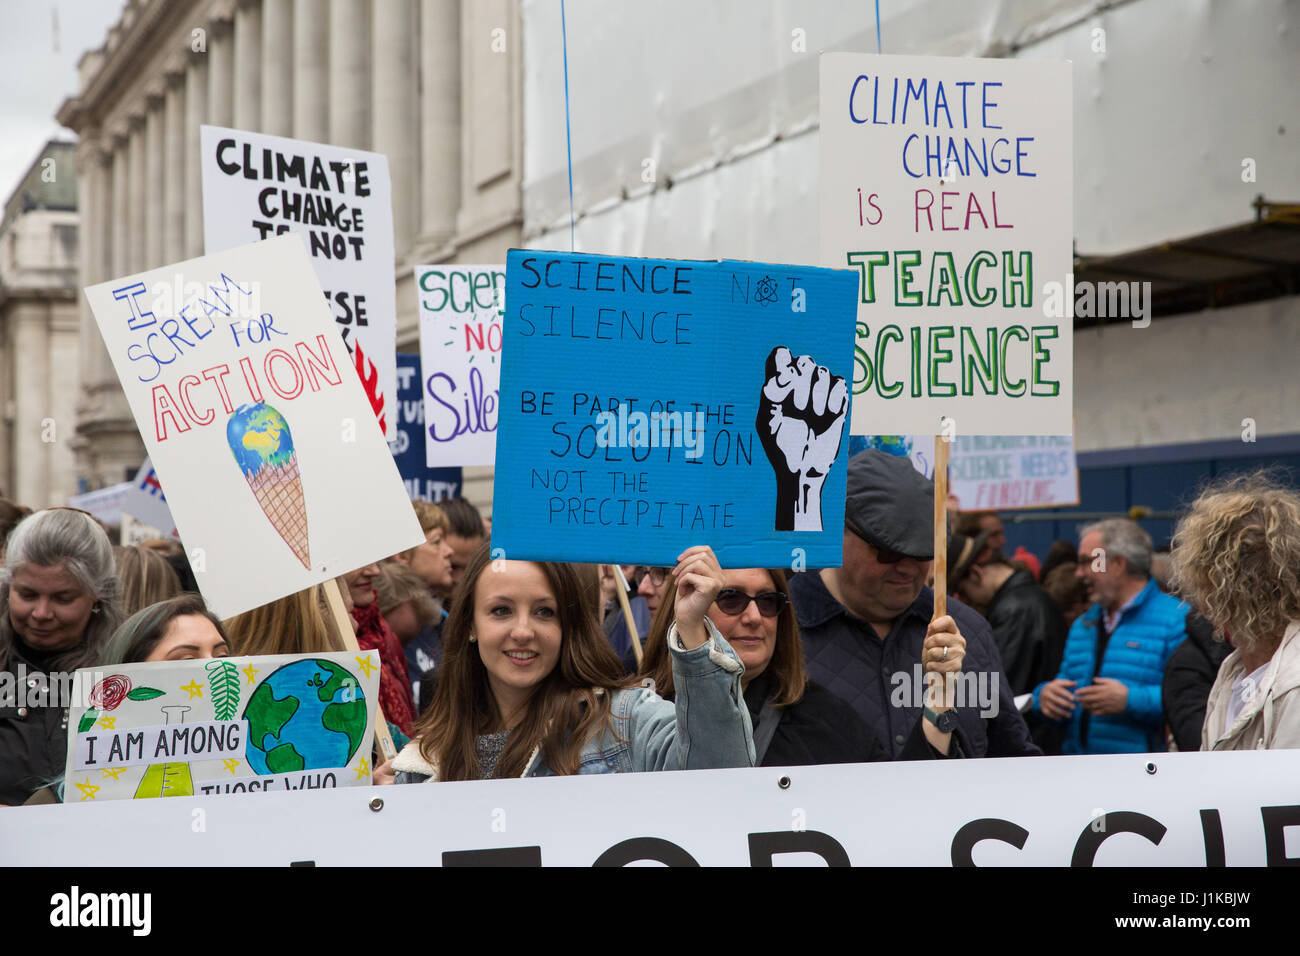 London, UK. 22nd Apr, 2017. Scientists prepare to march through central London on the ‘March for Science' as part of a global protest march in the name of science. The organisers of the march, which took place on Earth Day, stated that science is ‘under attack' from the administration of President Trump, with cuts to research funding into climate change and cancer and controversial statements by advisors such as Scott Pruitt, head of the US Environmental Protection Agency, who denied that carbon dioxide emissions are a primary cause of global warming. Credit: Mark Kerrison/Alamy Live News Stock Photo